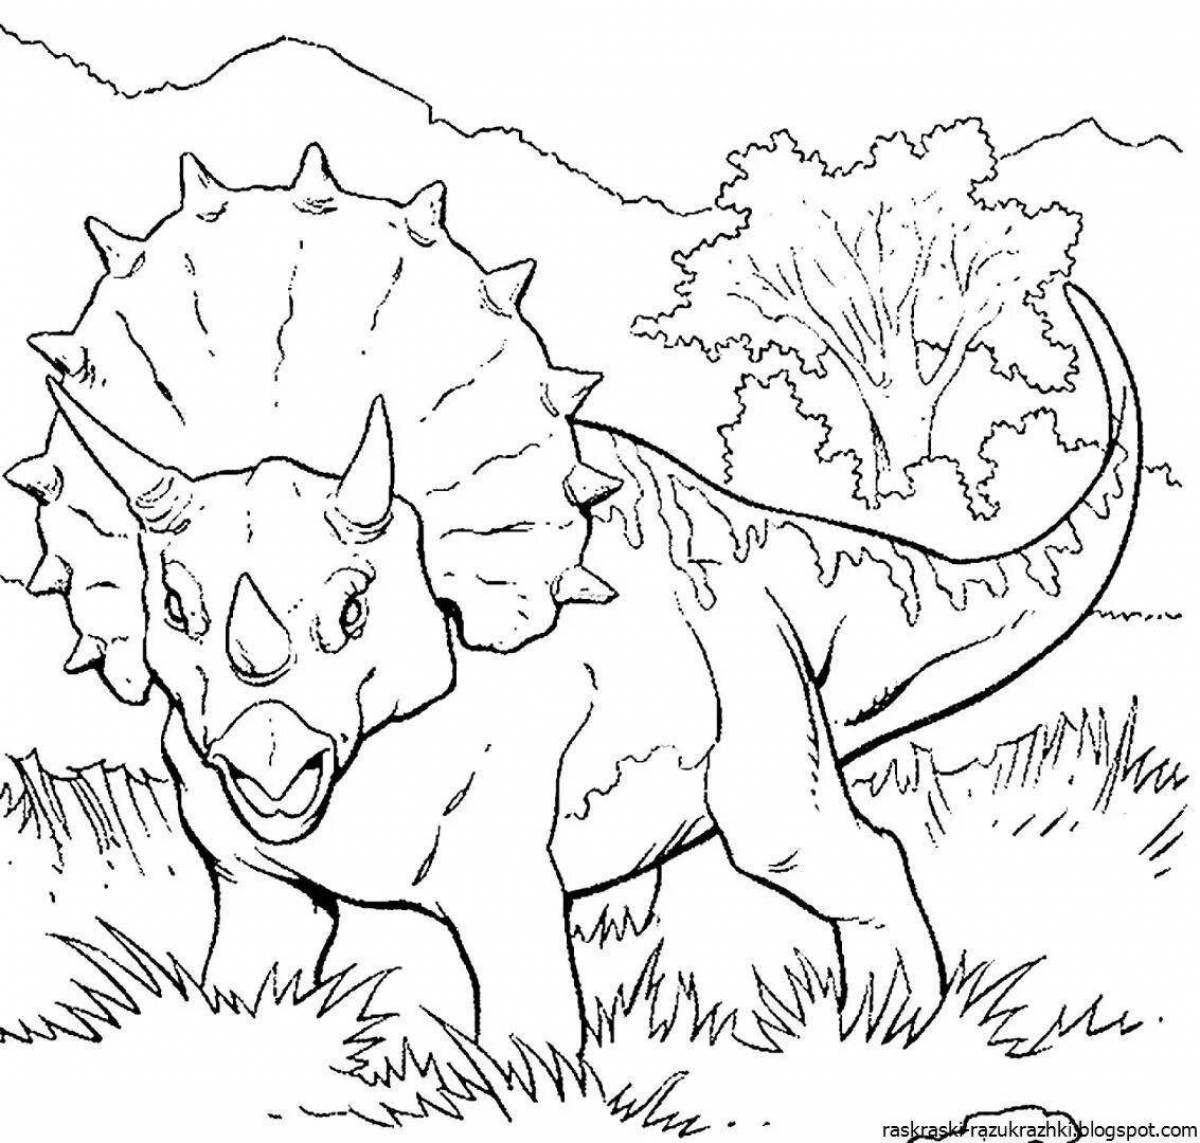 Adorable dinosaur coloring pages